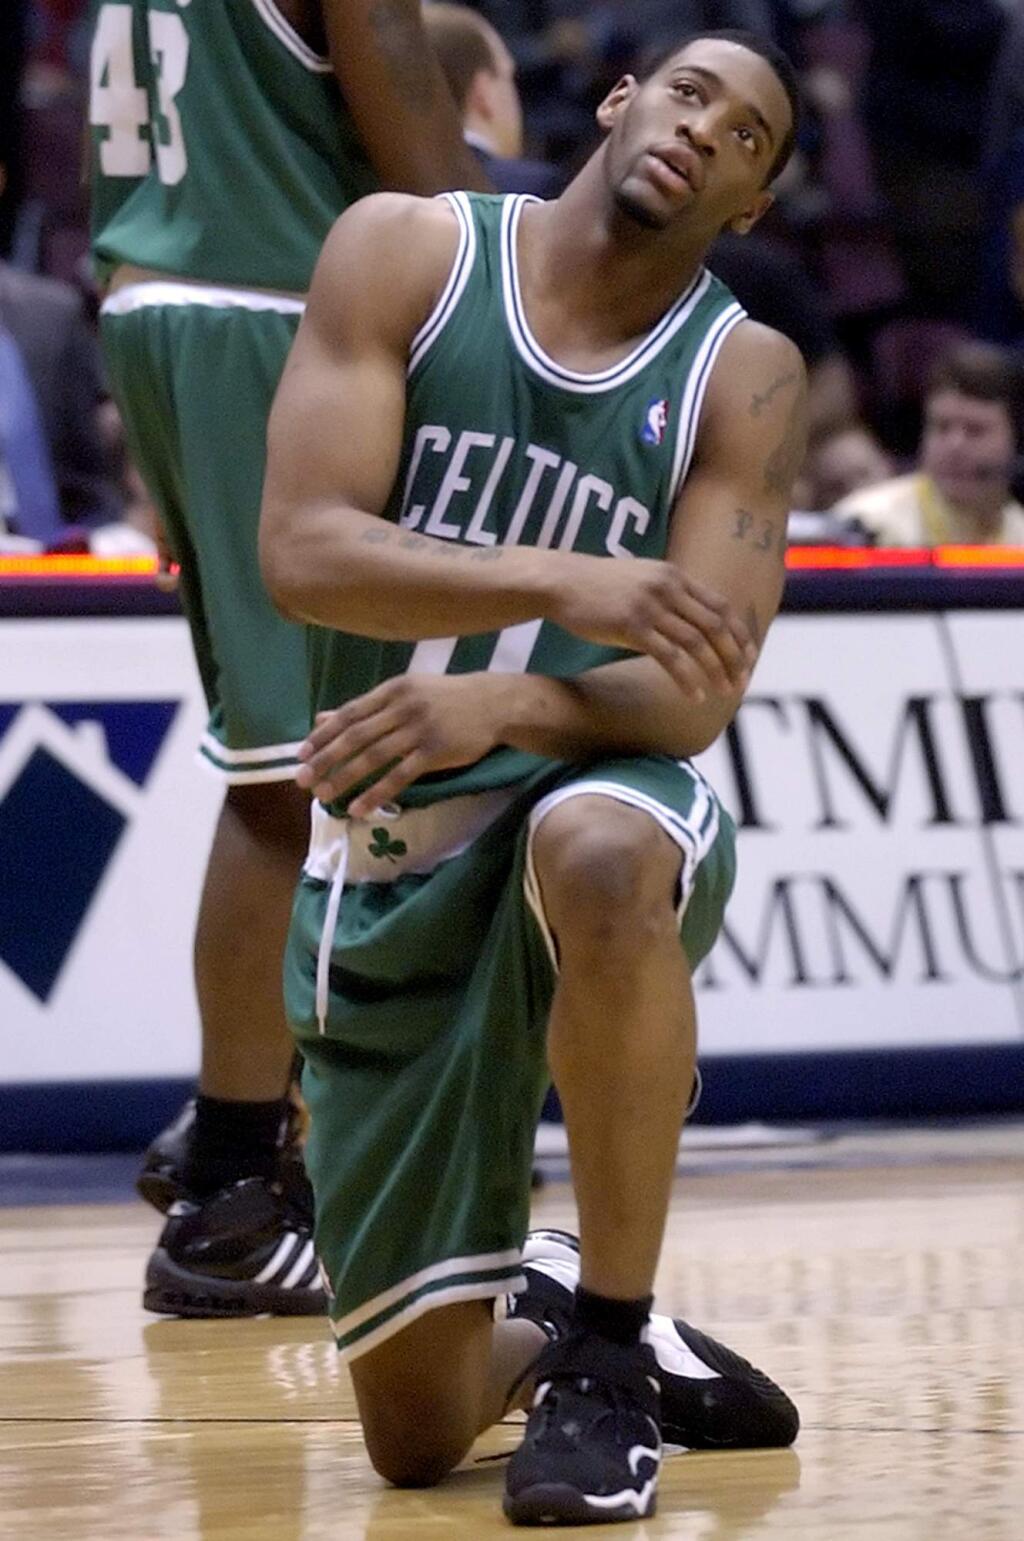 FILE - In this April 16, 2006 file photo, Boston Celtics' Orien Greene reacts after he fell and lost the ball during an NBA basketball game against the New Jersey Nets in East Rutherford, N.J. Greene has been arrested after being accused of breaking into two Florida homes and fondling a woman. News outlets report Greene was taken into custody Monday, Jan. 9, 2017 on battery and burglary charges. (AP Photo/Bill Kostroun, File)